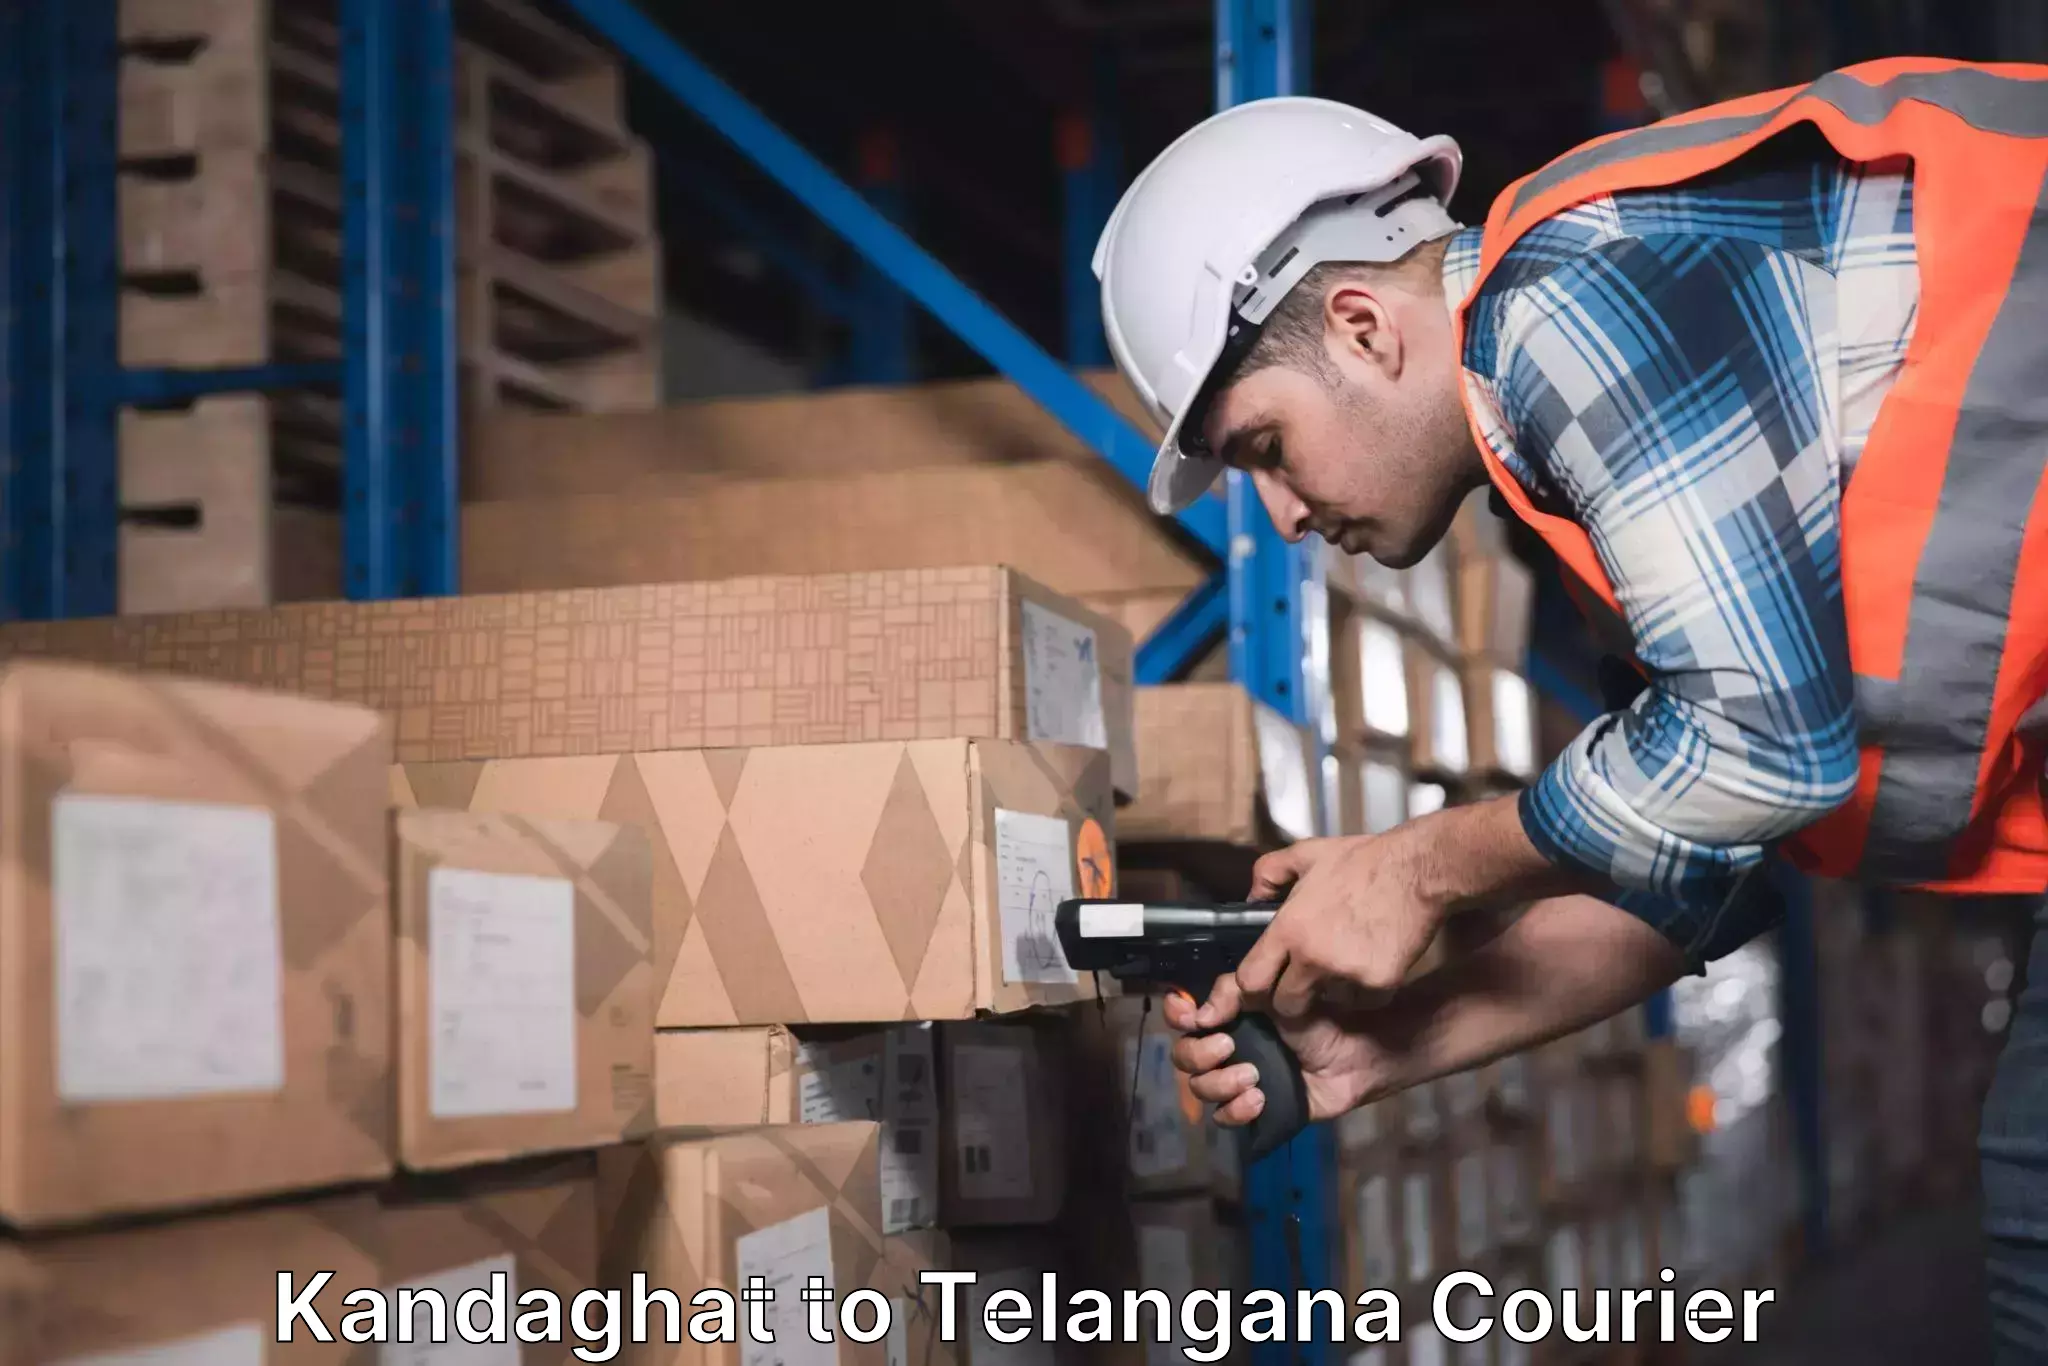 State-of-the-art courier technology Kandaghat to Telangana